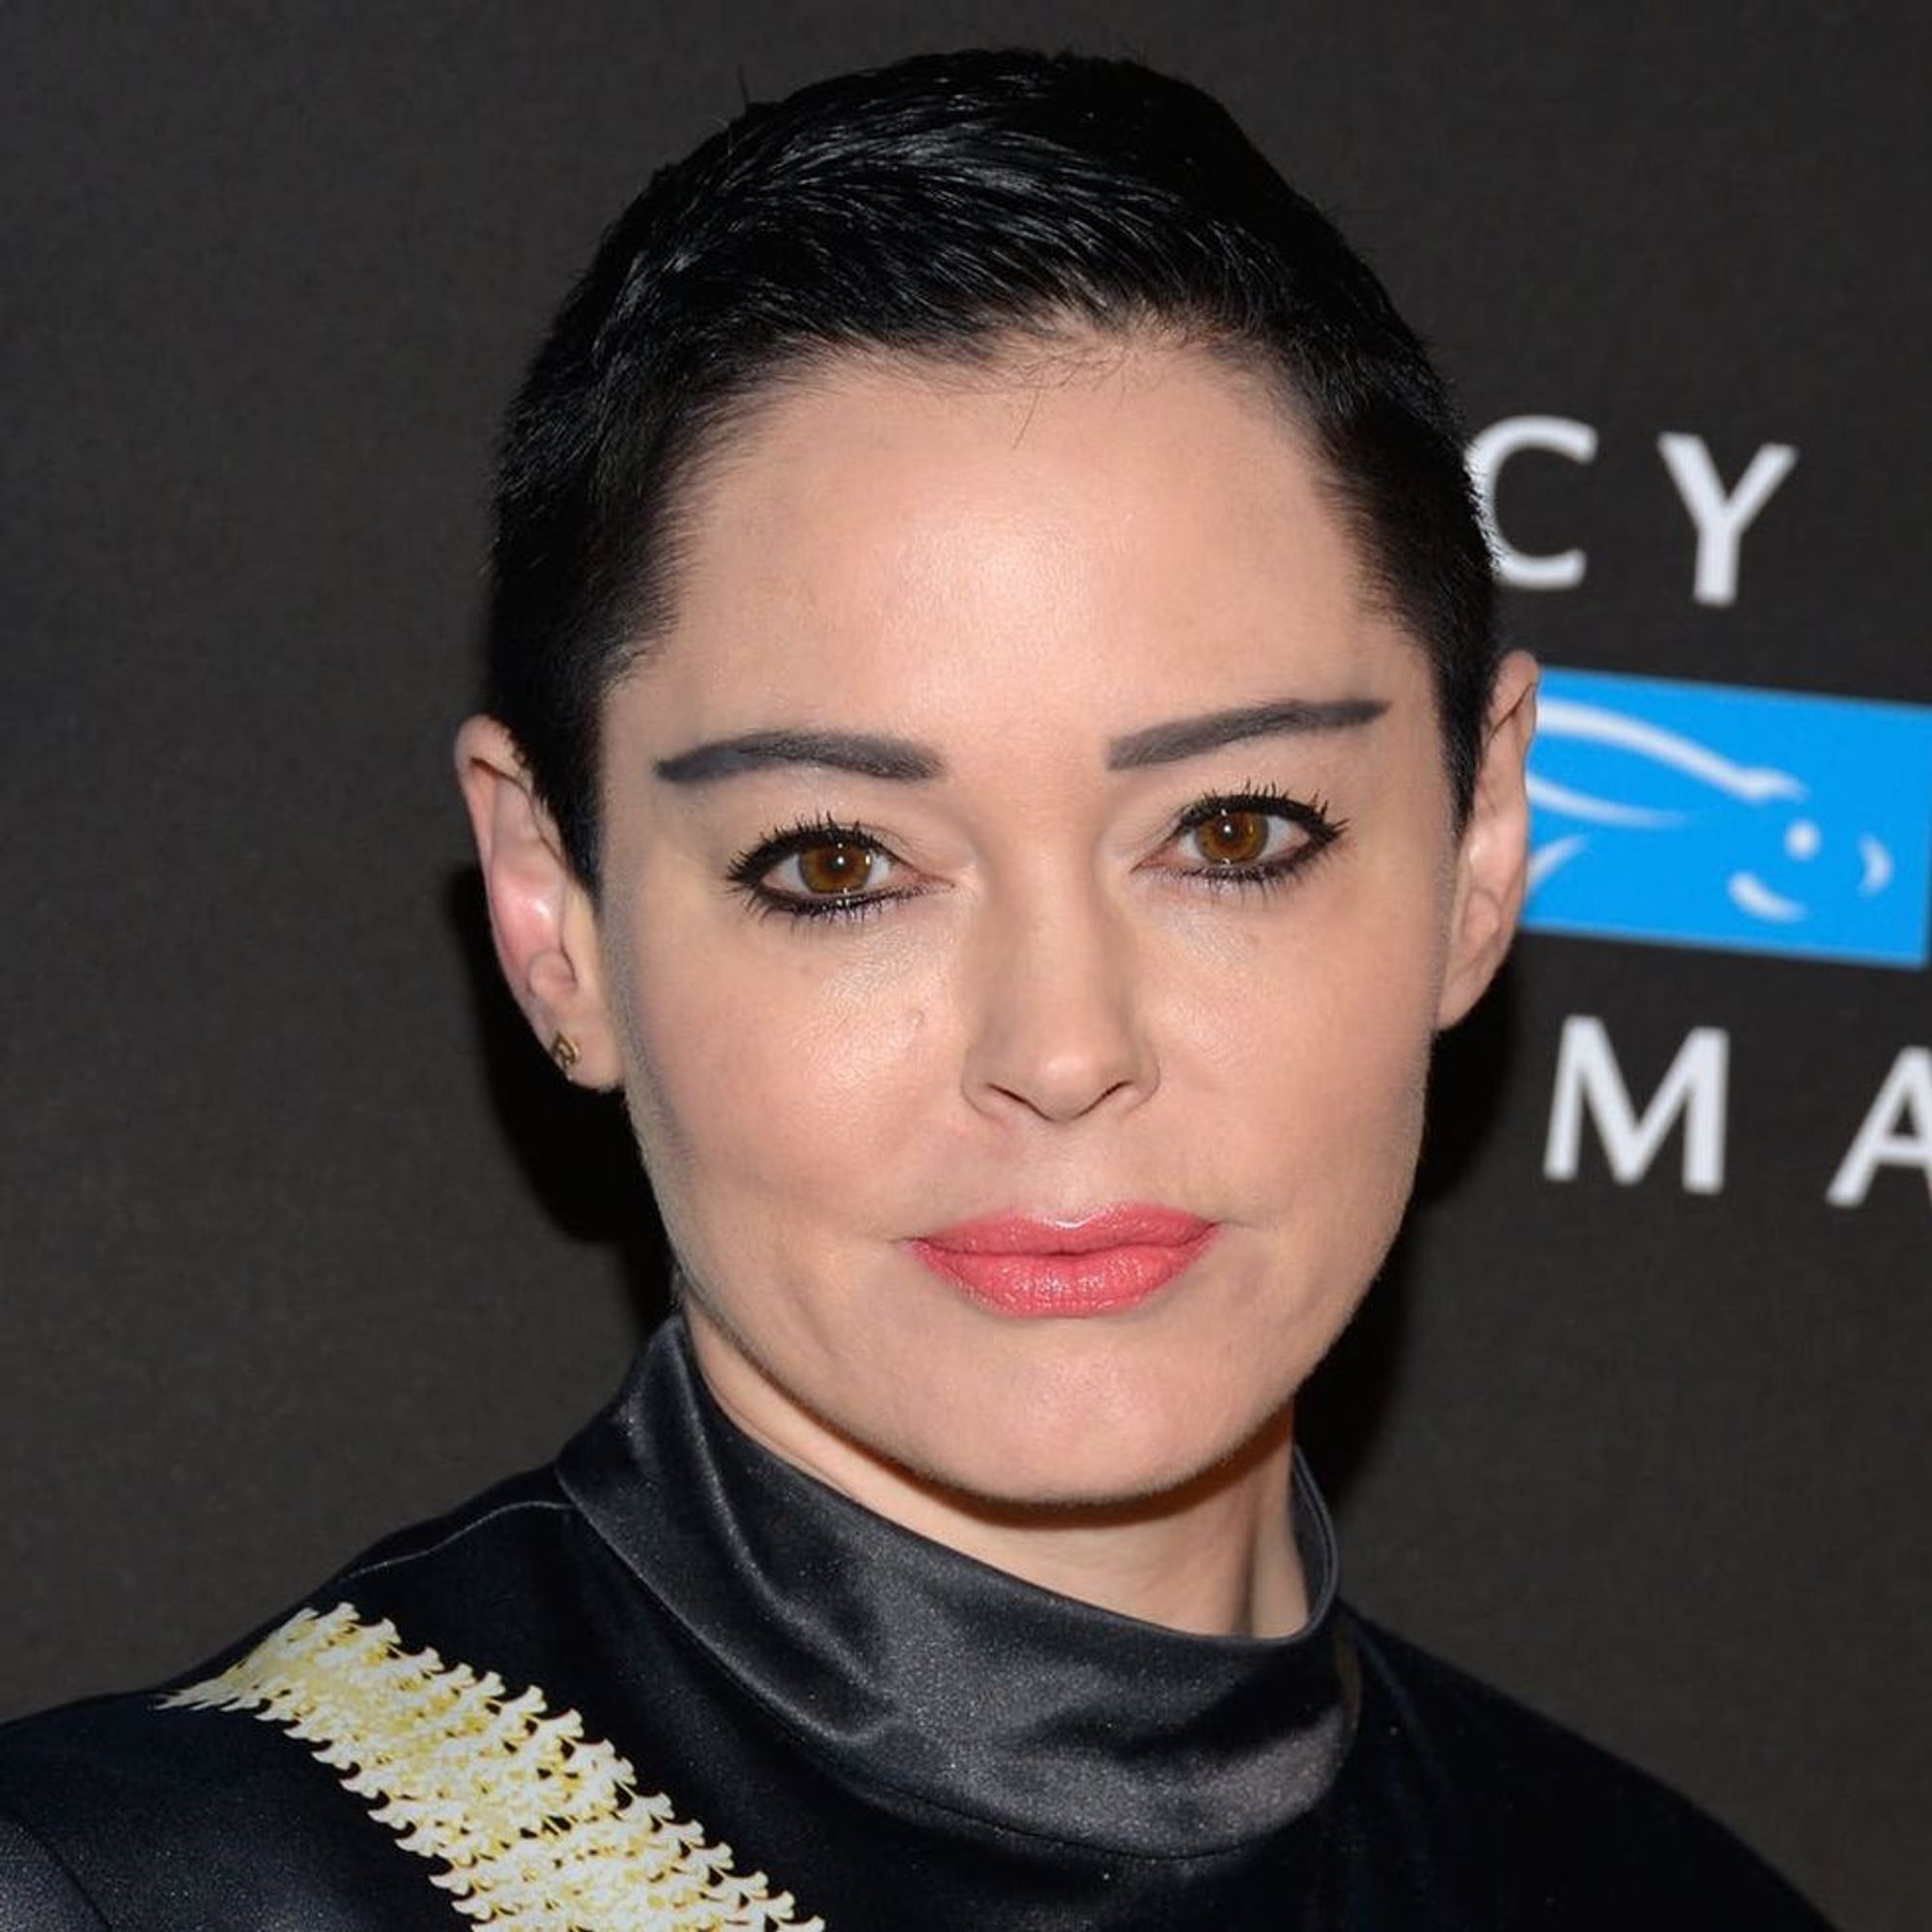 Theres no clear reason why Rose McGowan was suspended on 